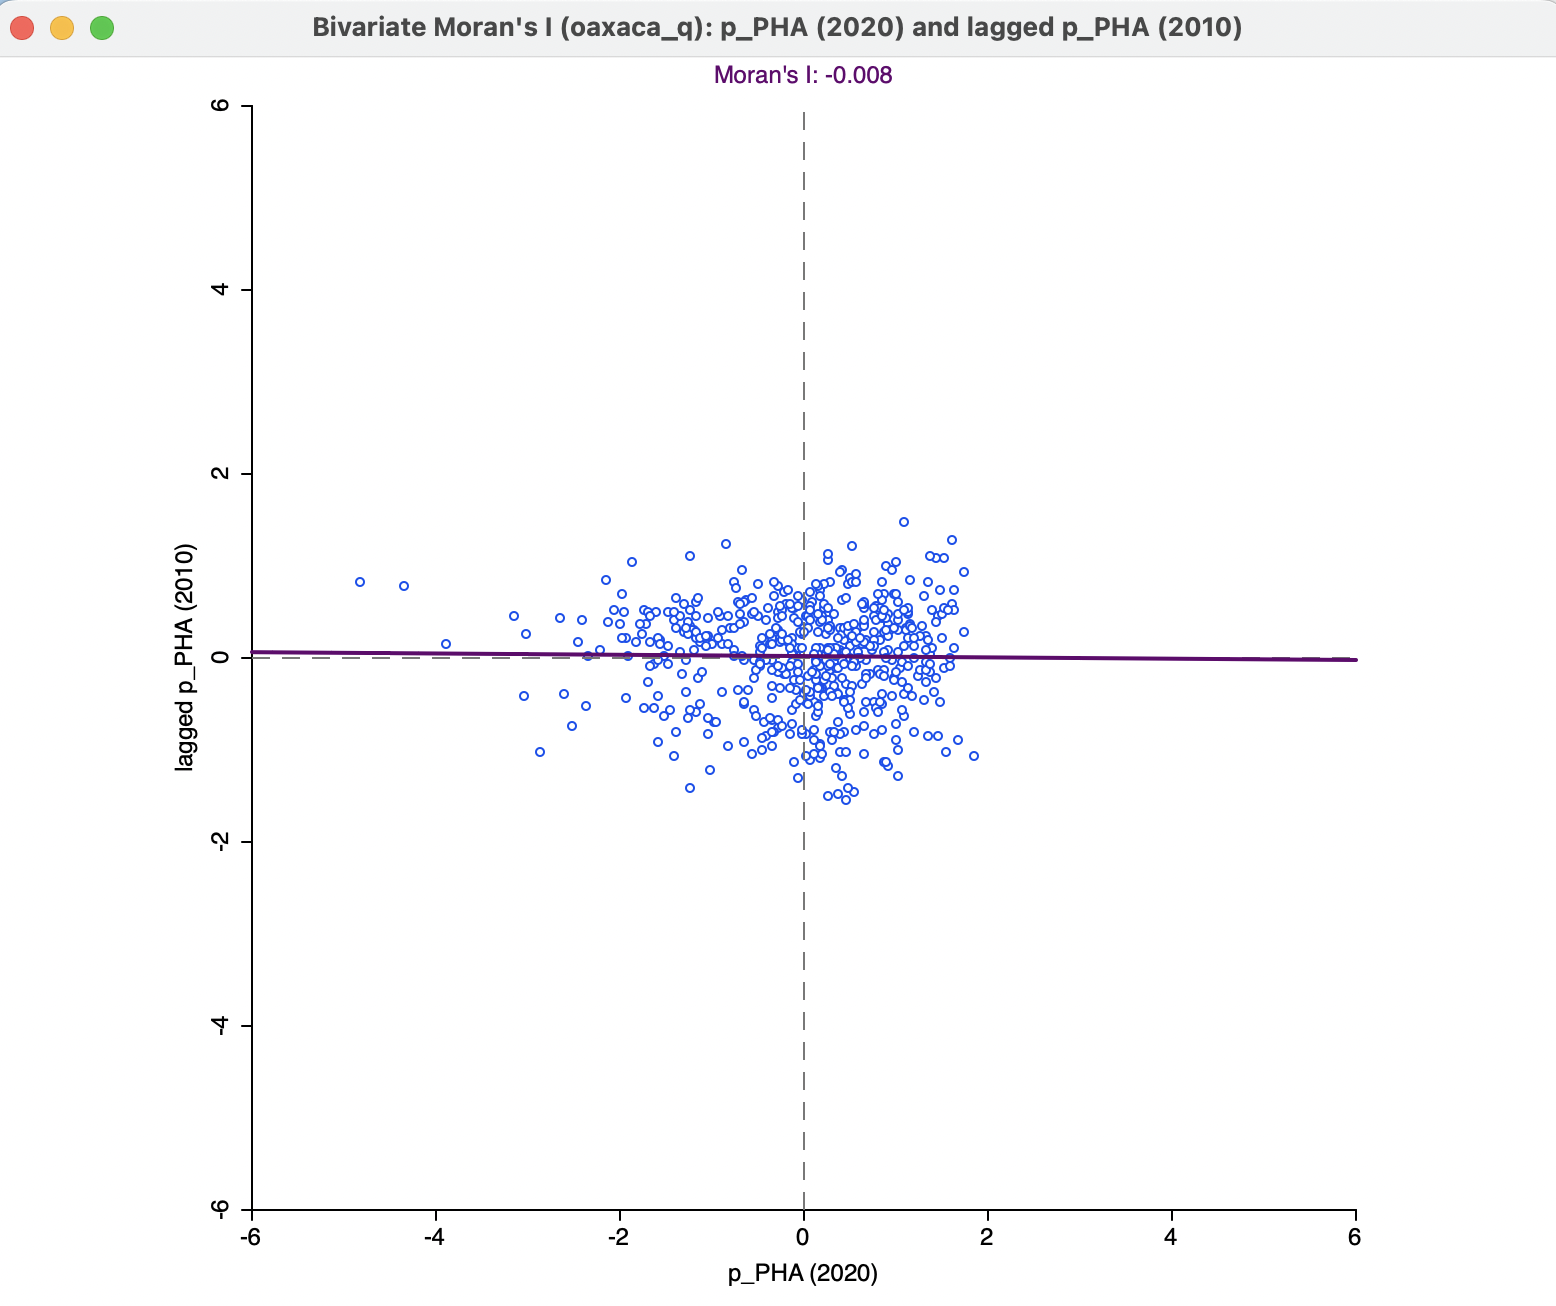 Bivariate Moran scatter plot for access to health care 2020 and its spatial lag in 2010